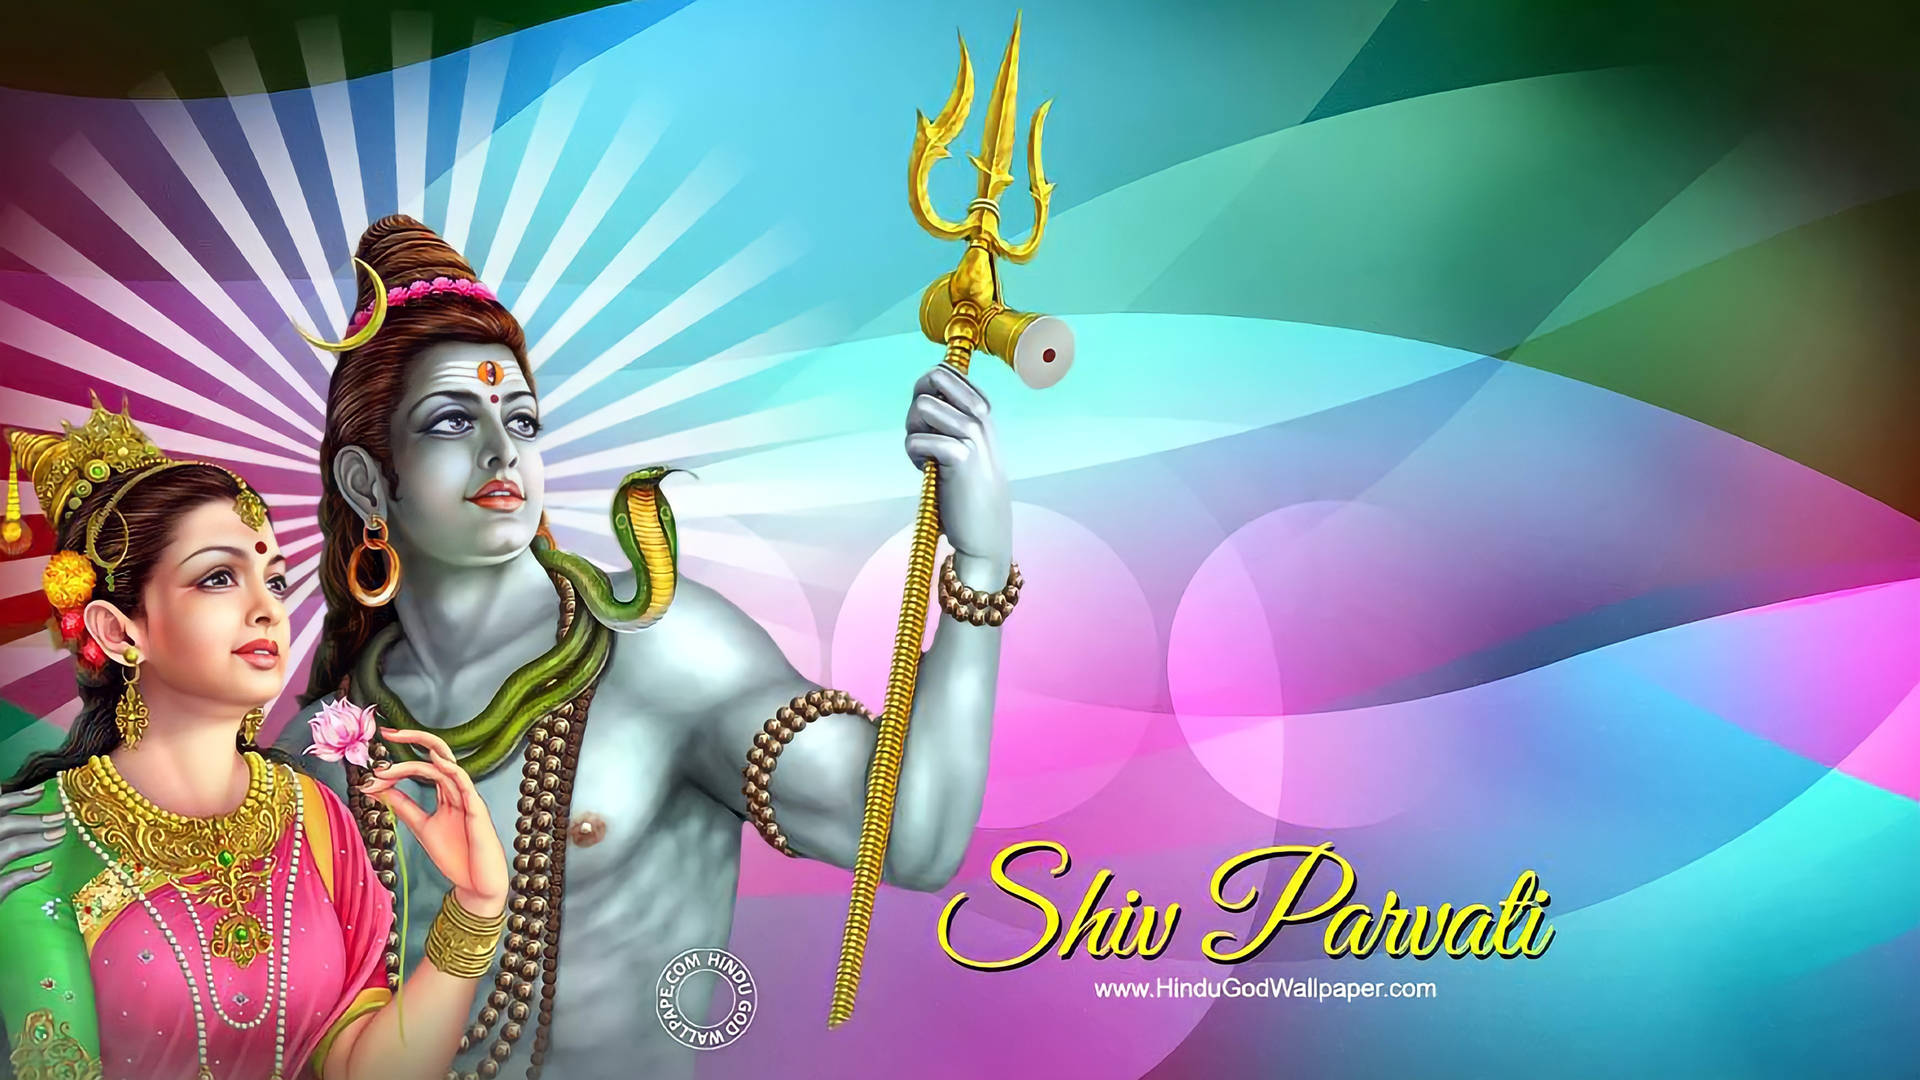 Get Seduced with these Shiv Parvati Love Quotes in English